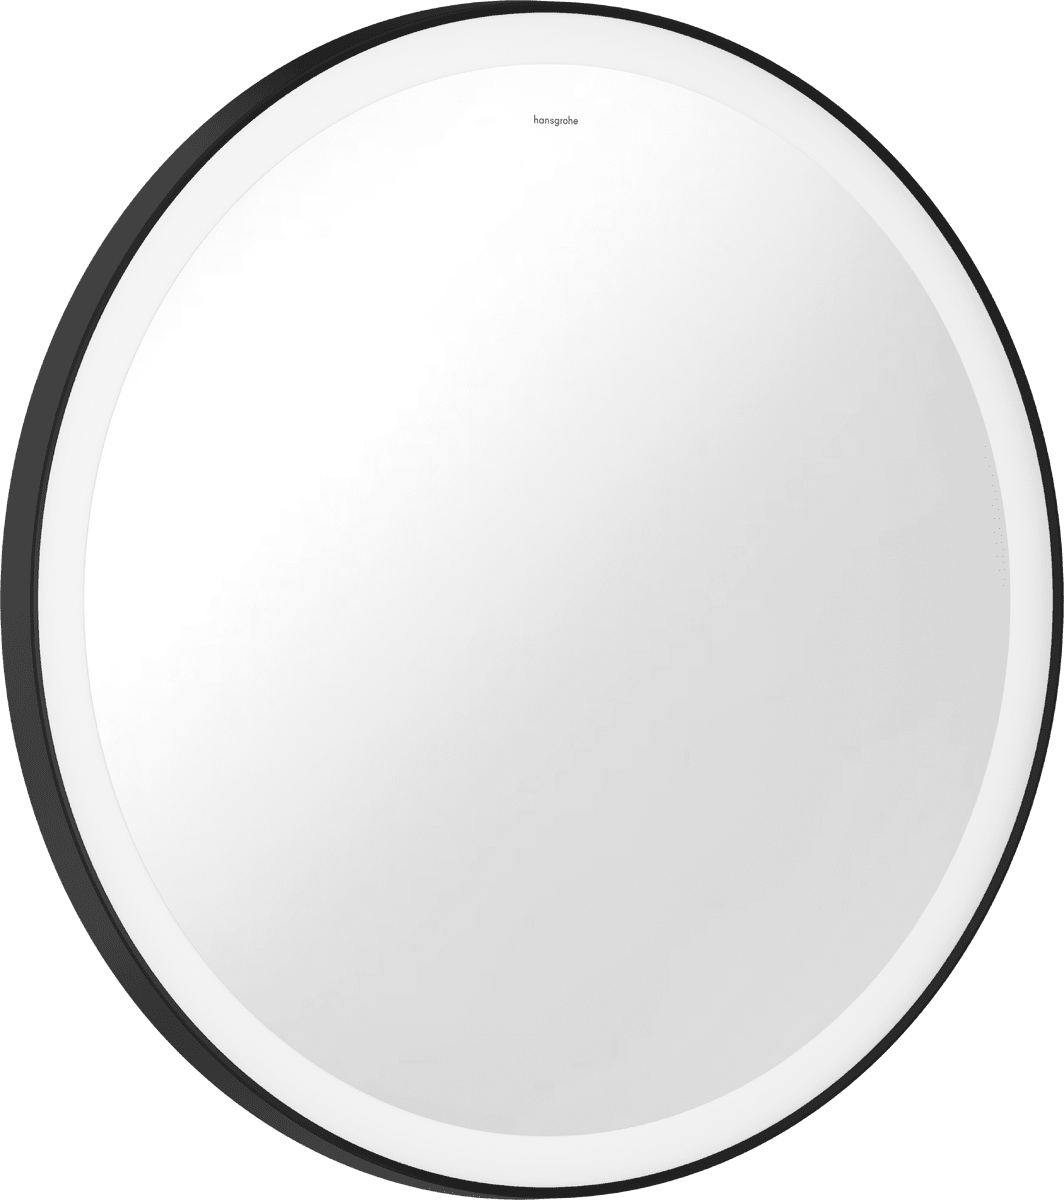 Picture of HANSGROHE Xarita Lite S Mirror with circular LED lights 700/30 wall switch #54966670 - Matt Black